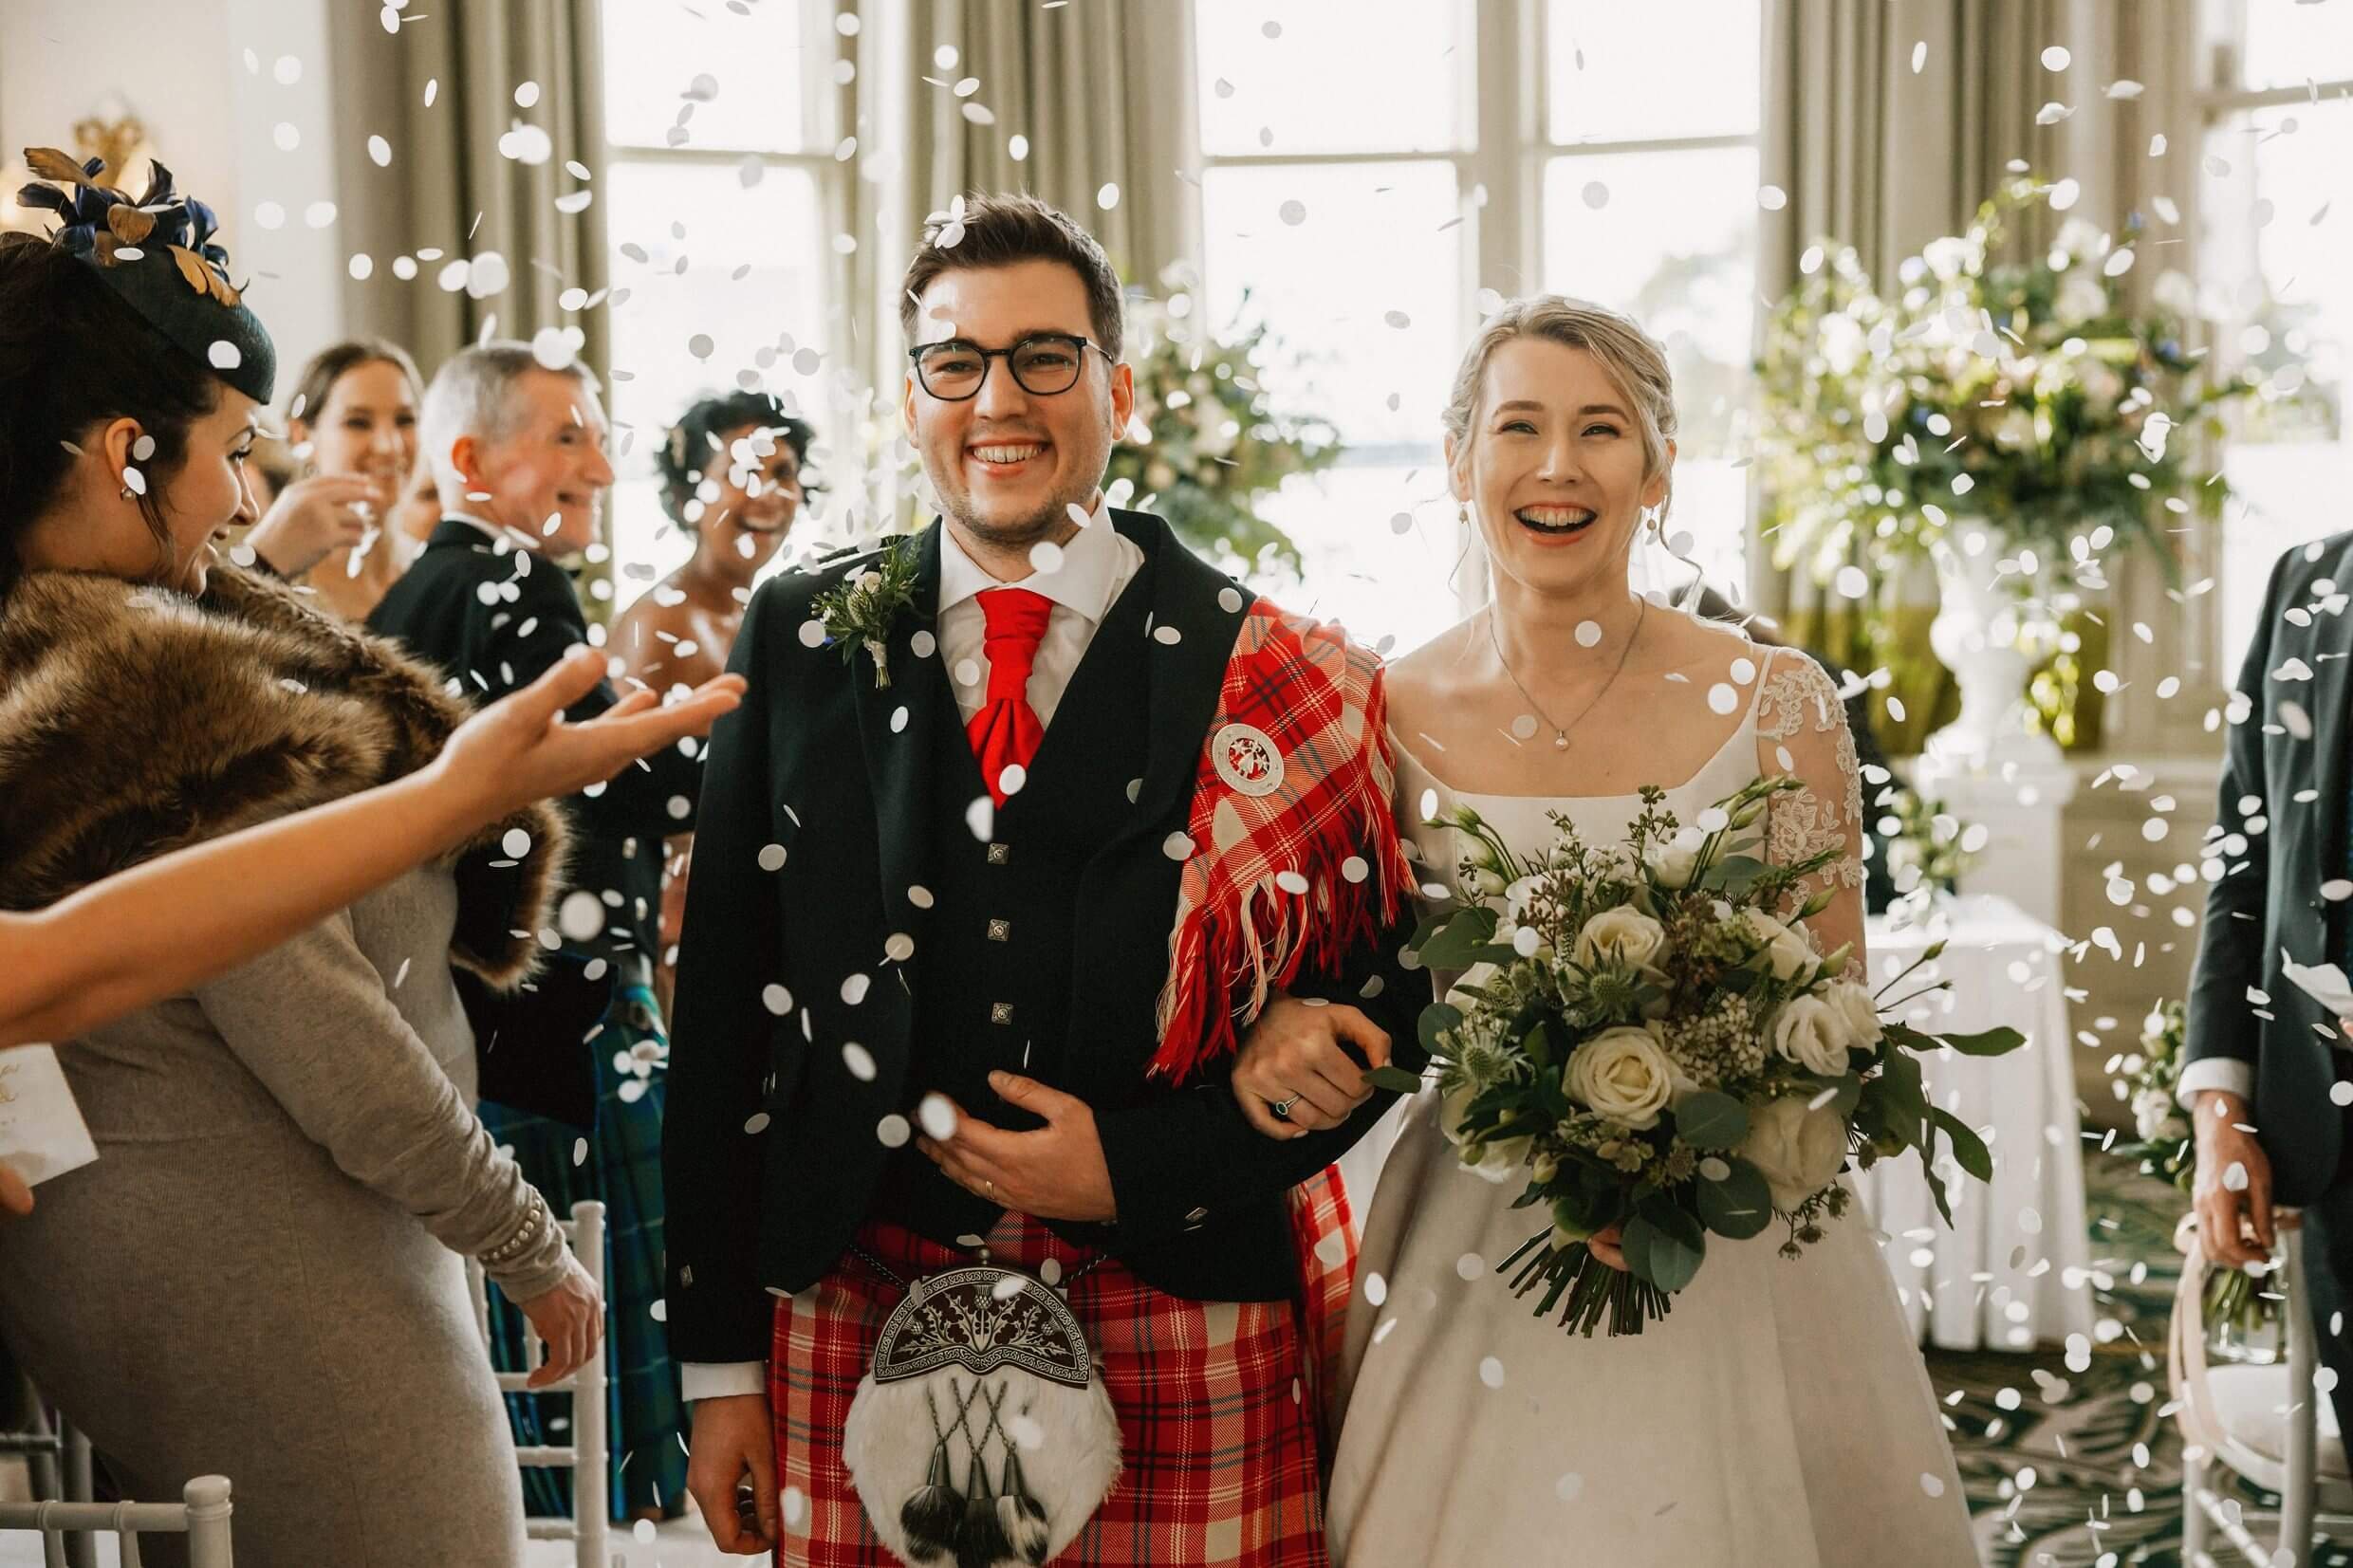 the bride and groom smile and link arms as guests throw confetti following a balmoral hotel edinburgh wedding ceremony